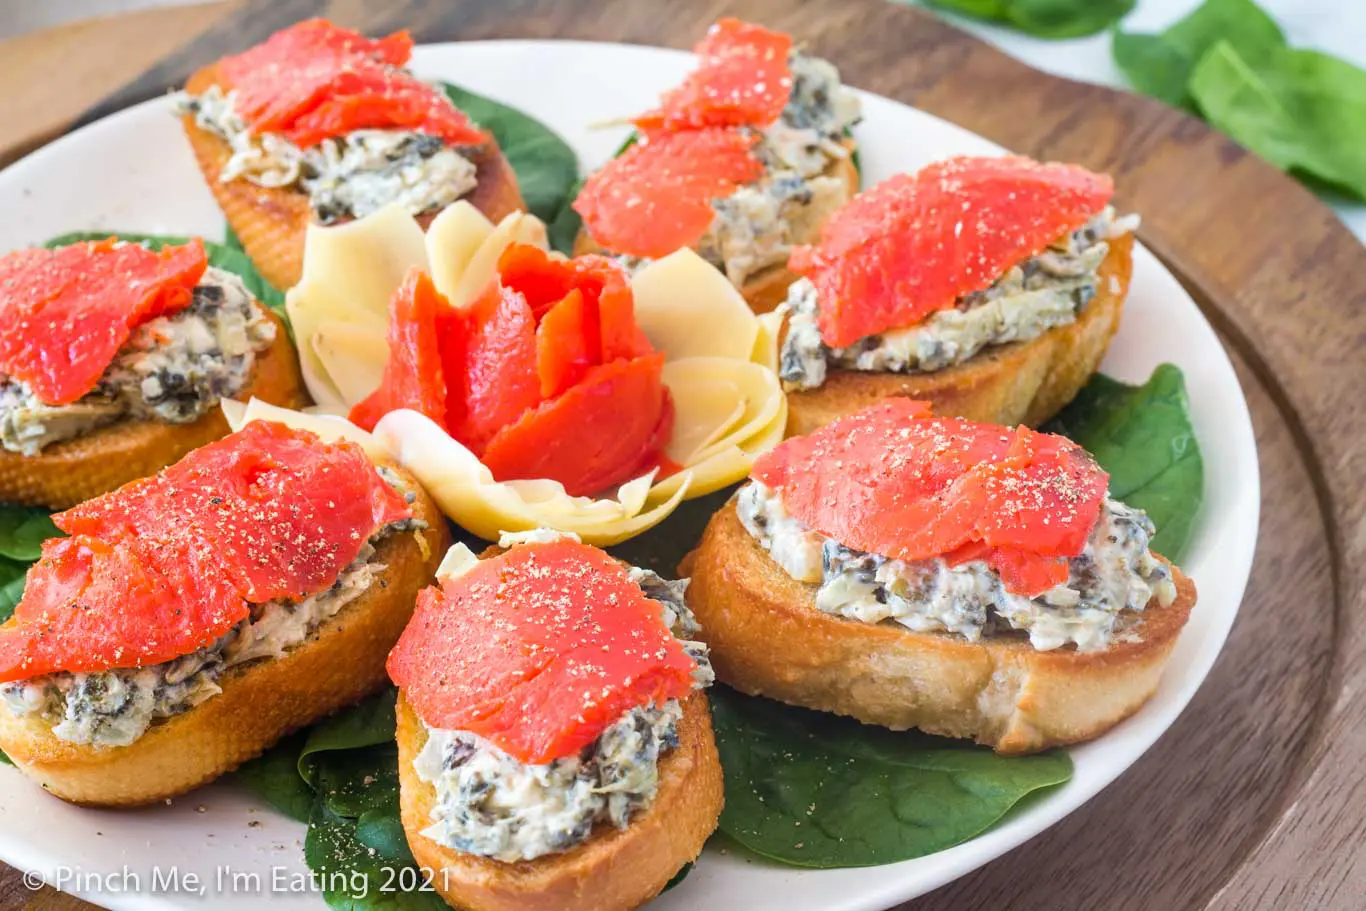 Artichoke spinach dip crostini with smoked salmon arranged in on a white plate around a flower made of artichoke heart and smoked salmon